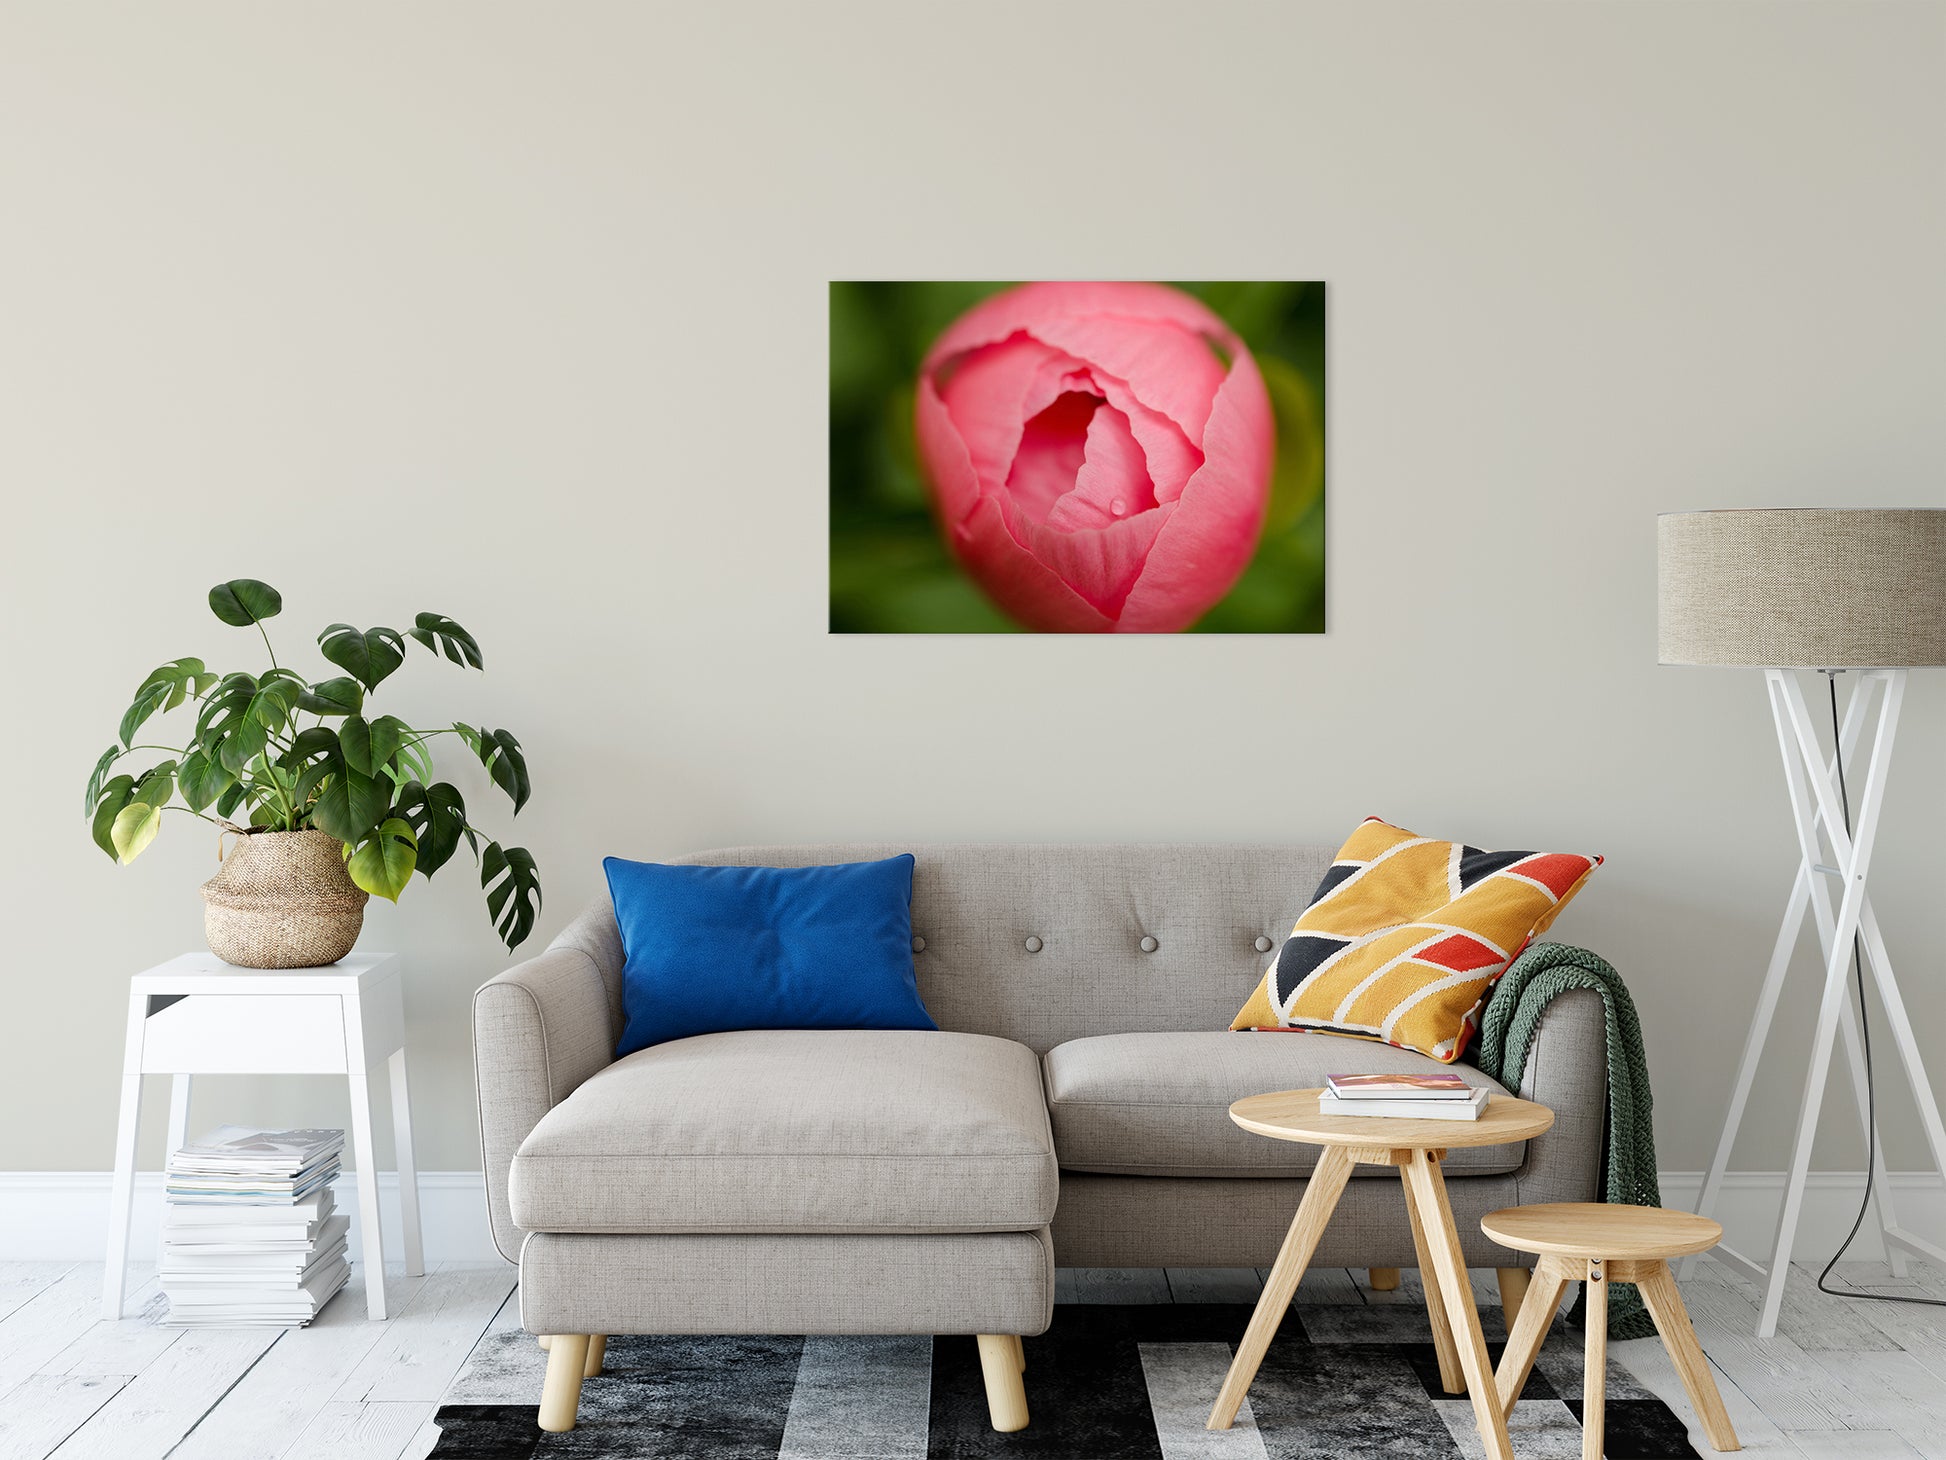 Peony Bud Nature / Floral Photo Fine Art Canvas Wall Art Prints 24" x 36" - PIPAFINEART